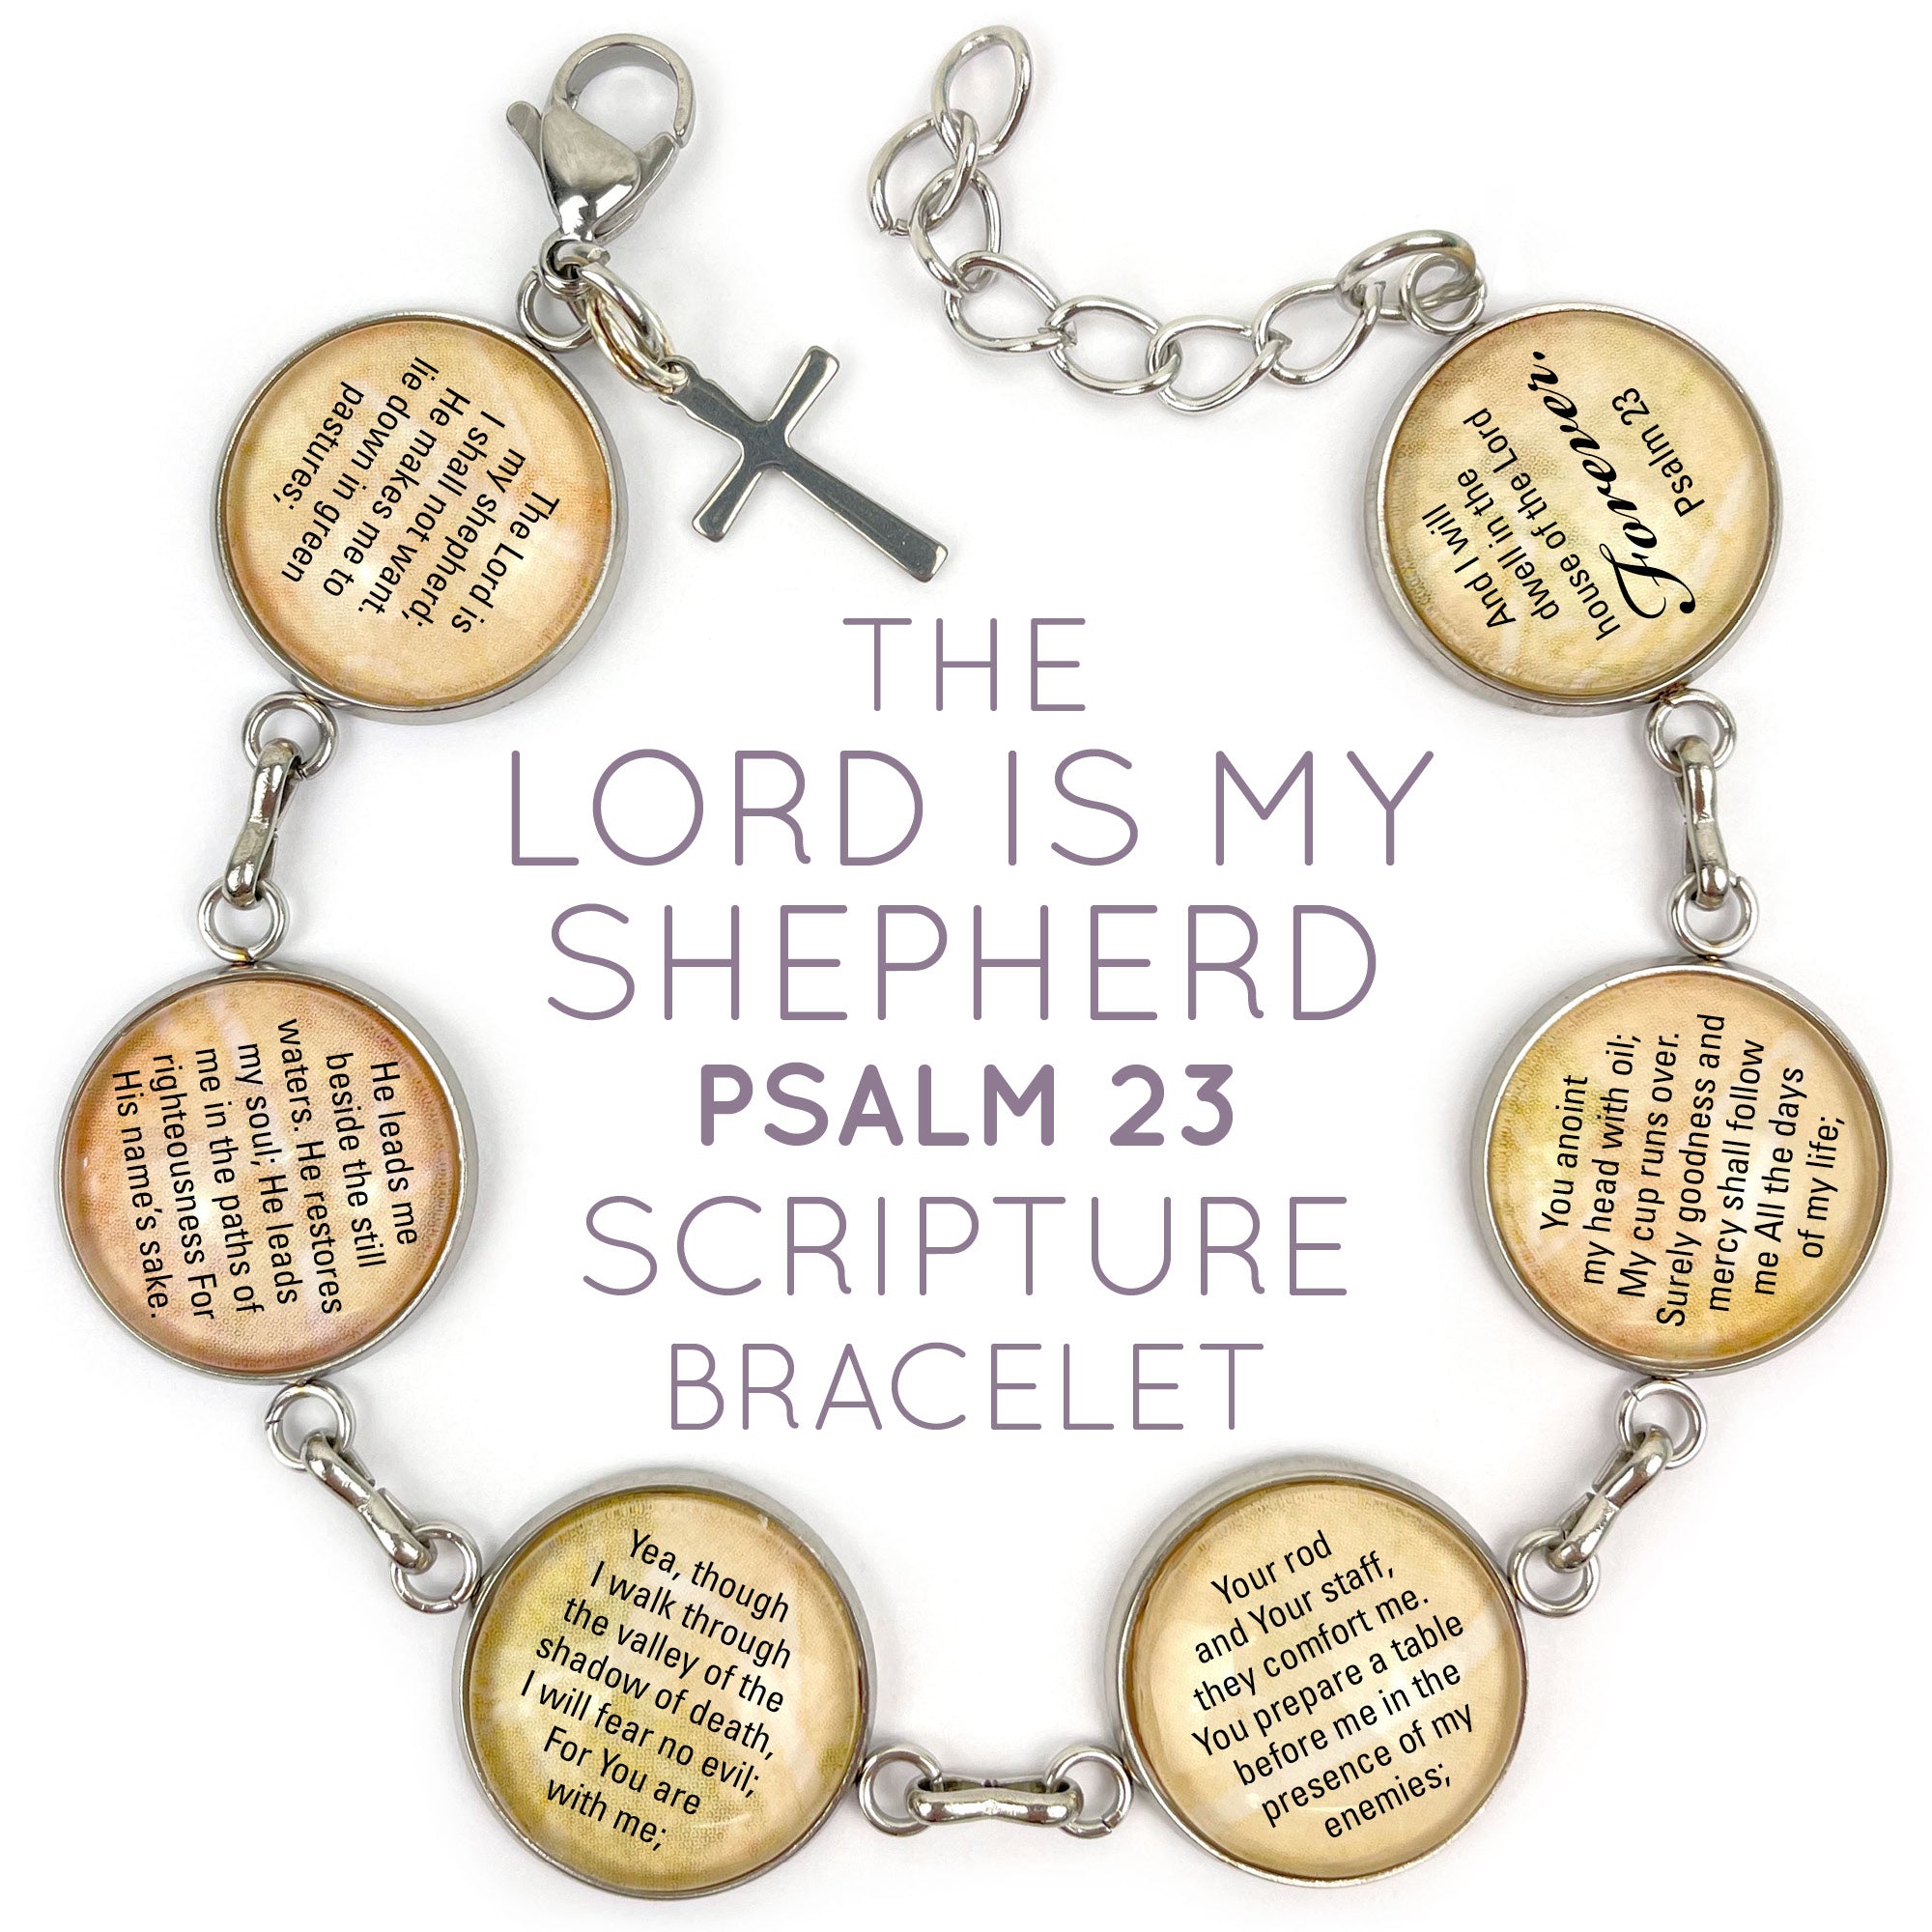 Psalm 23 Scripture Charm Bracelet - Handcrafted with Glass Charms and Dangling Cross - Bracelets - Bijou Her -  -  - 